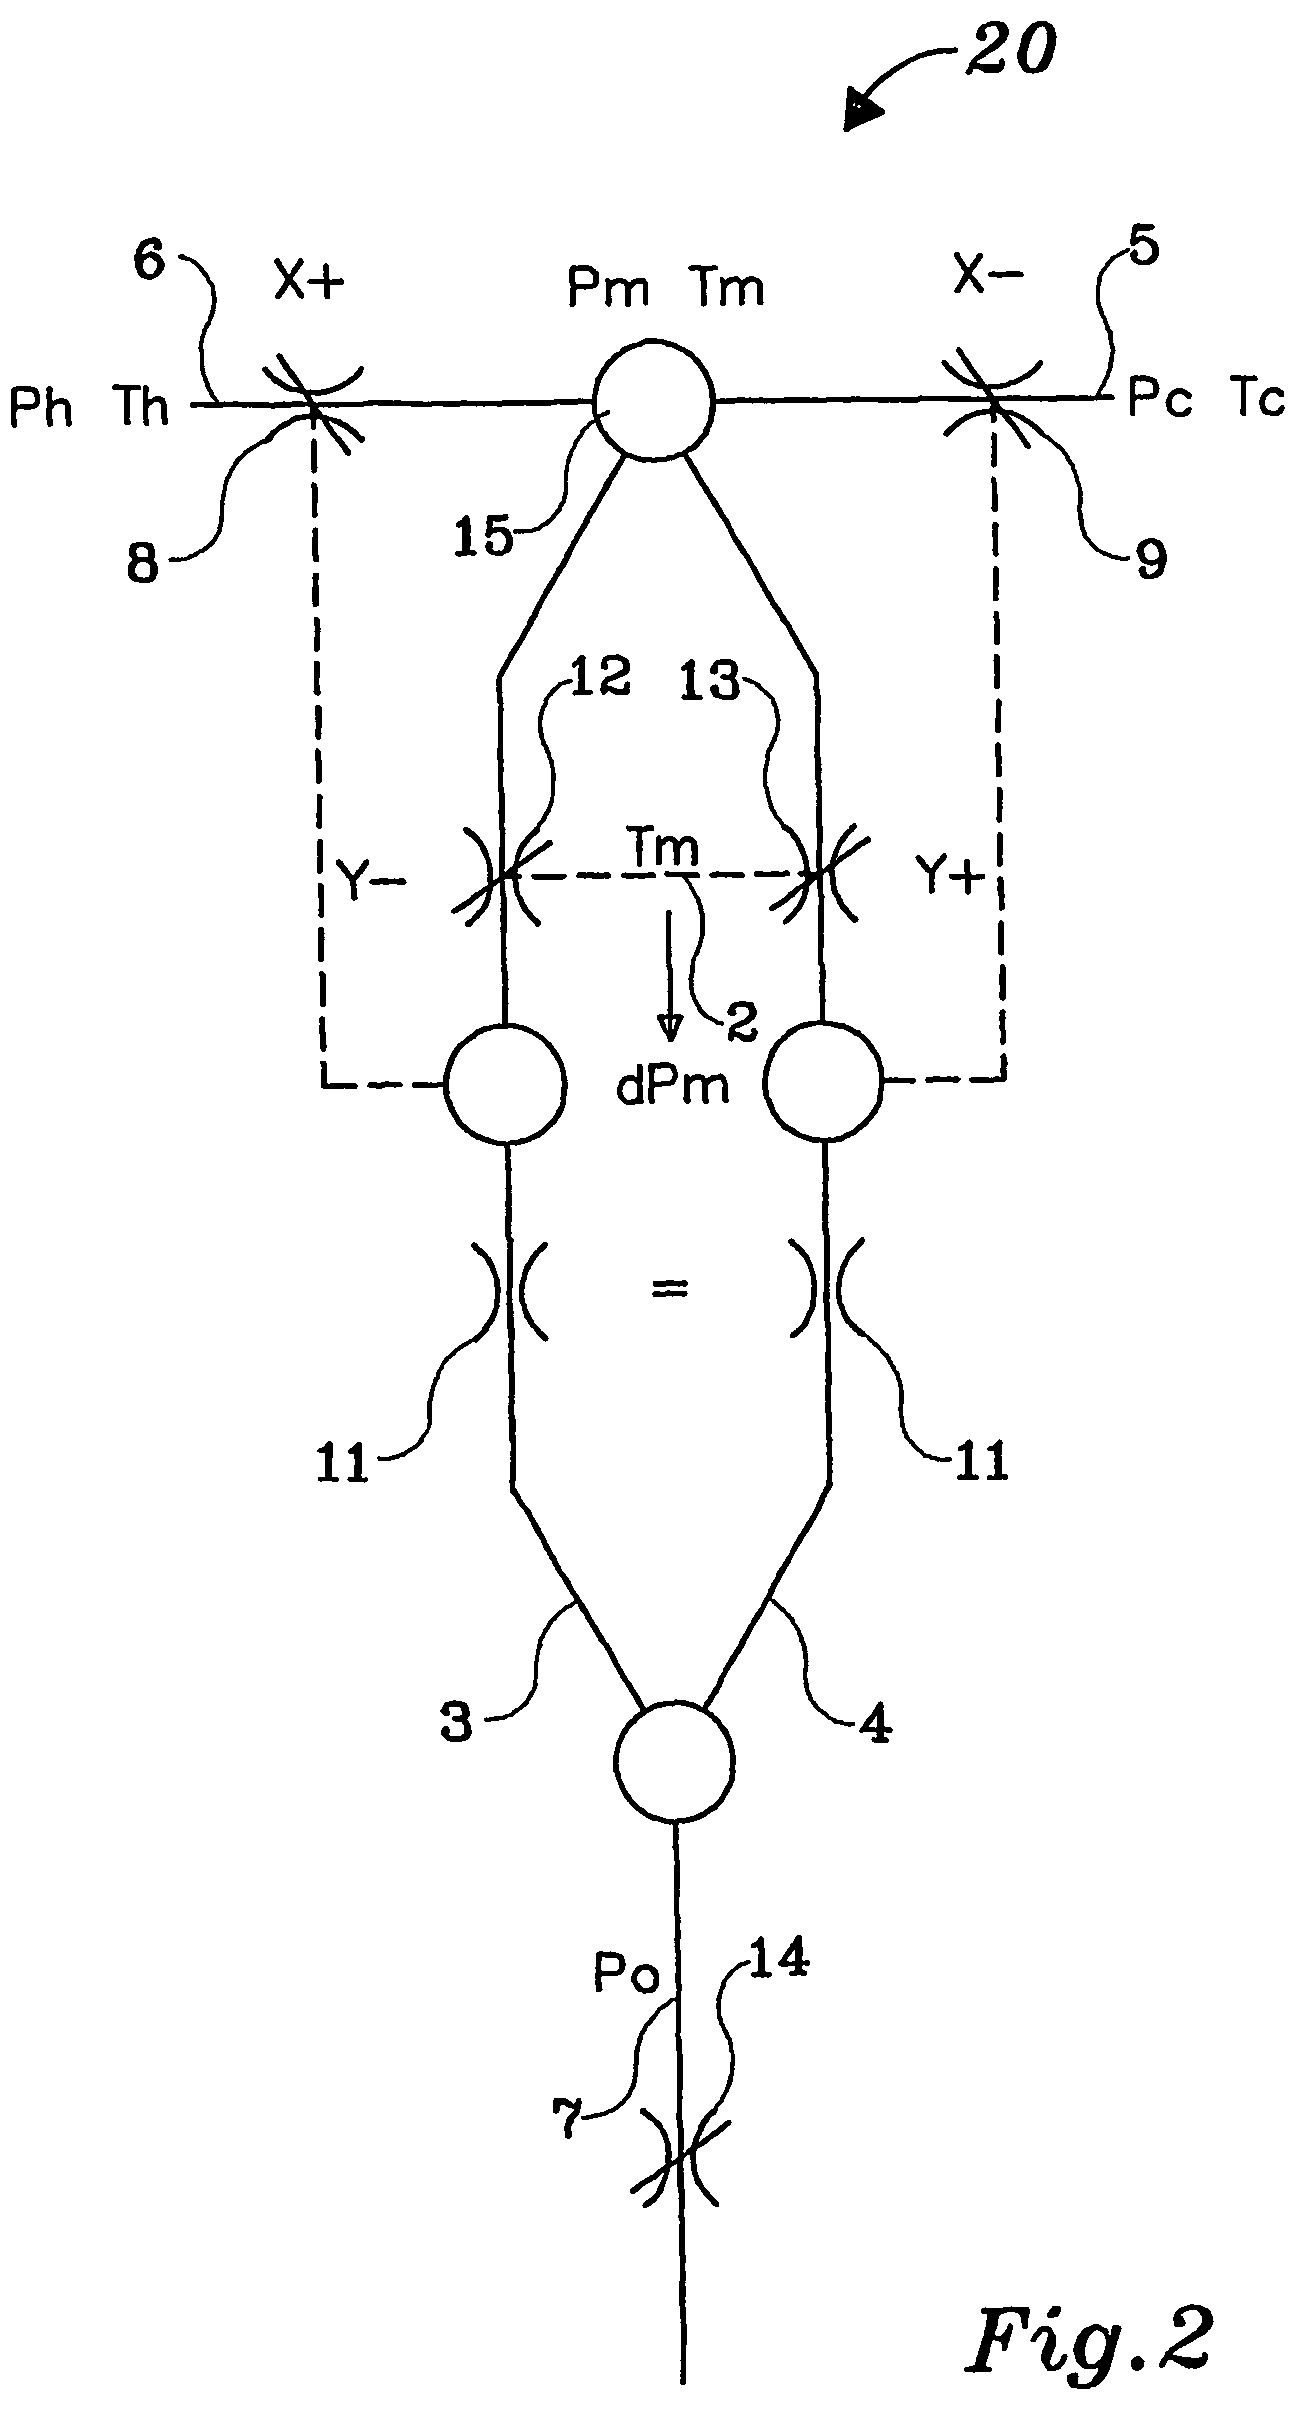 Hydraulically controlled thermostatic mixing valve